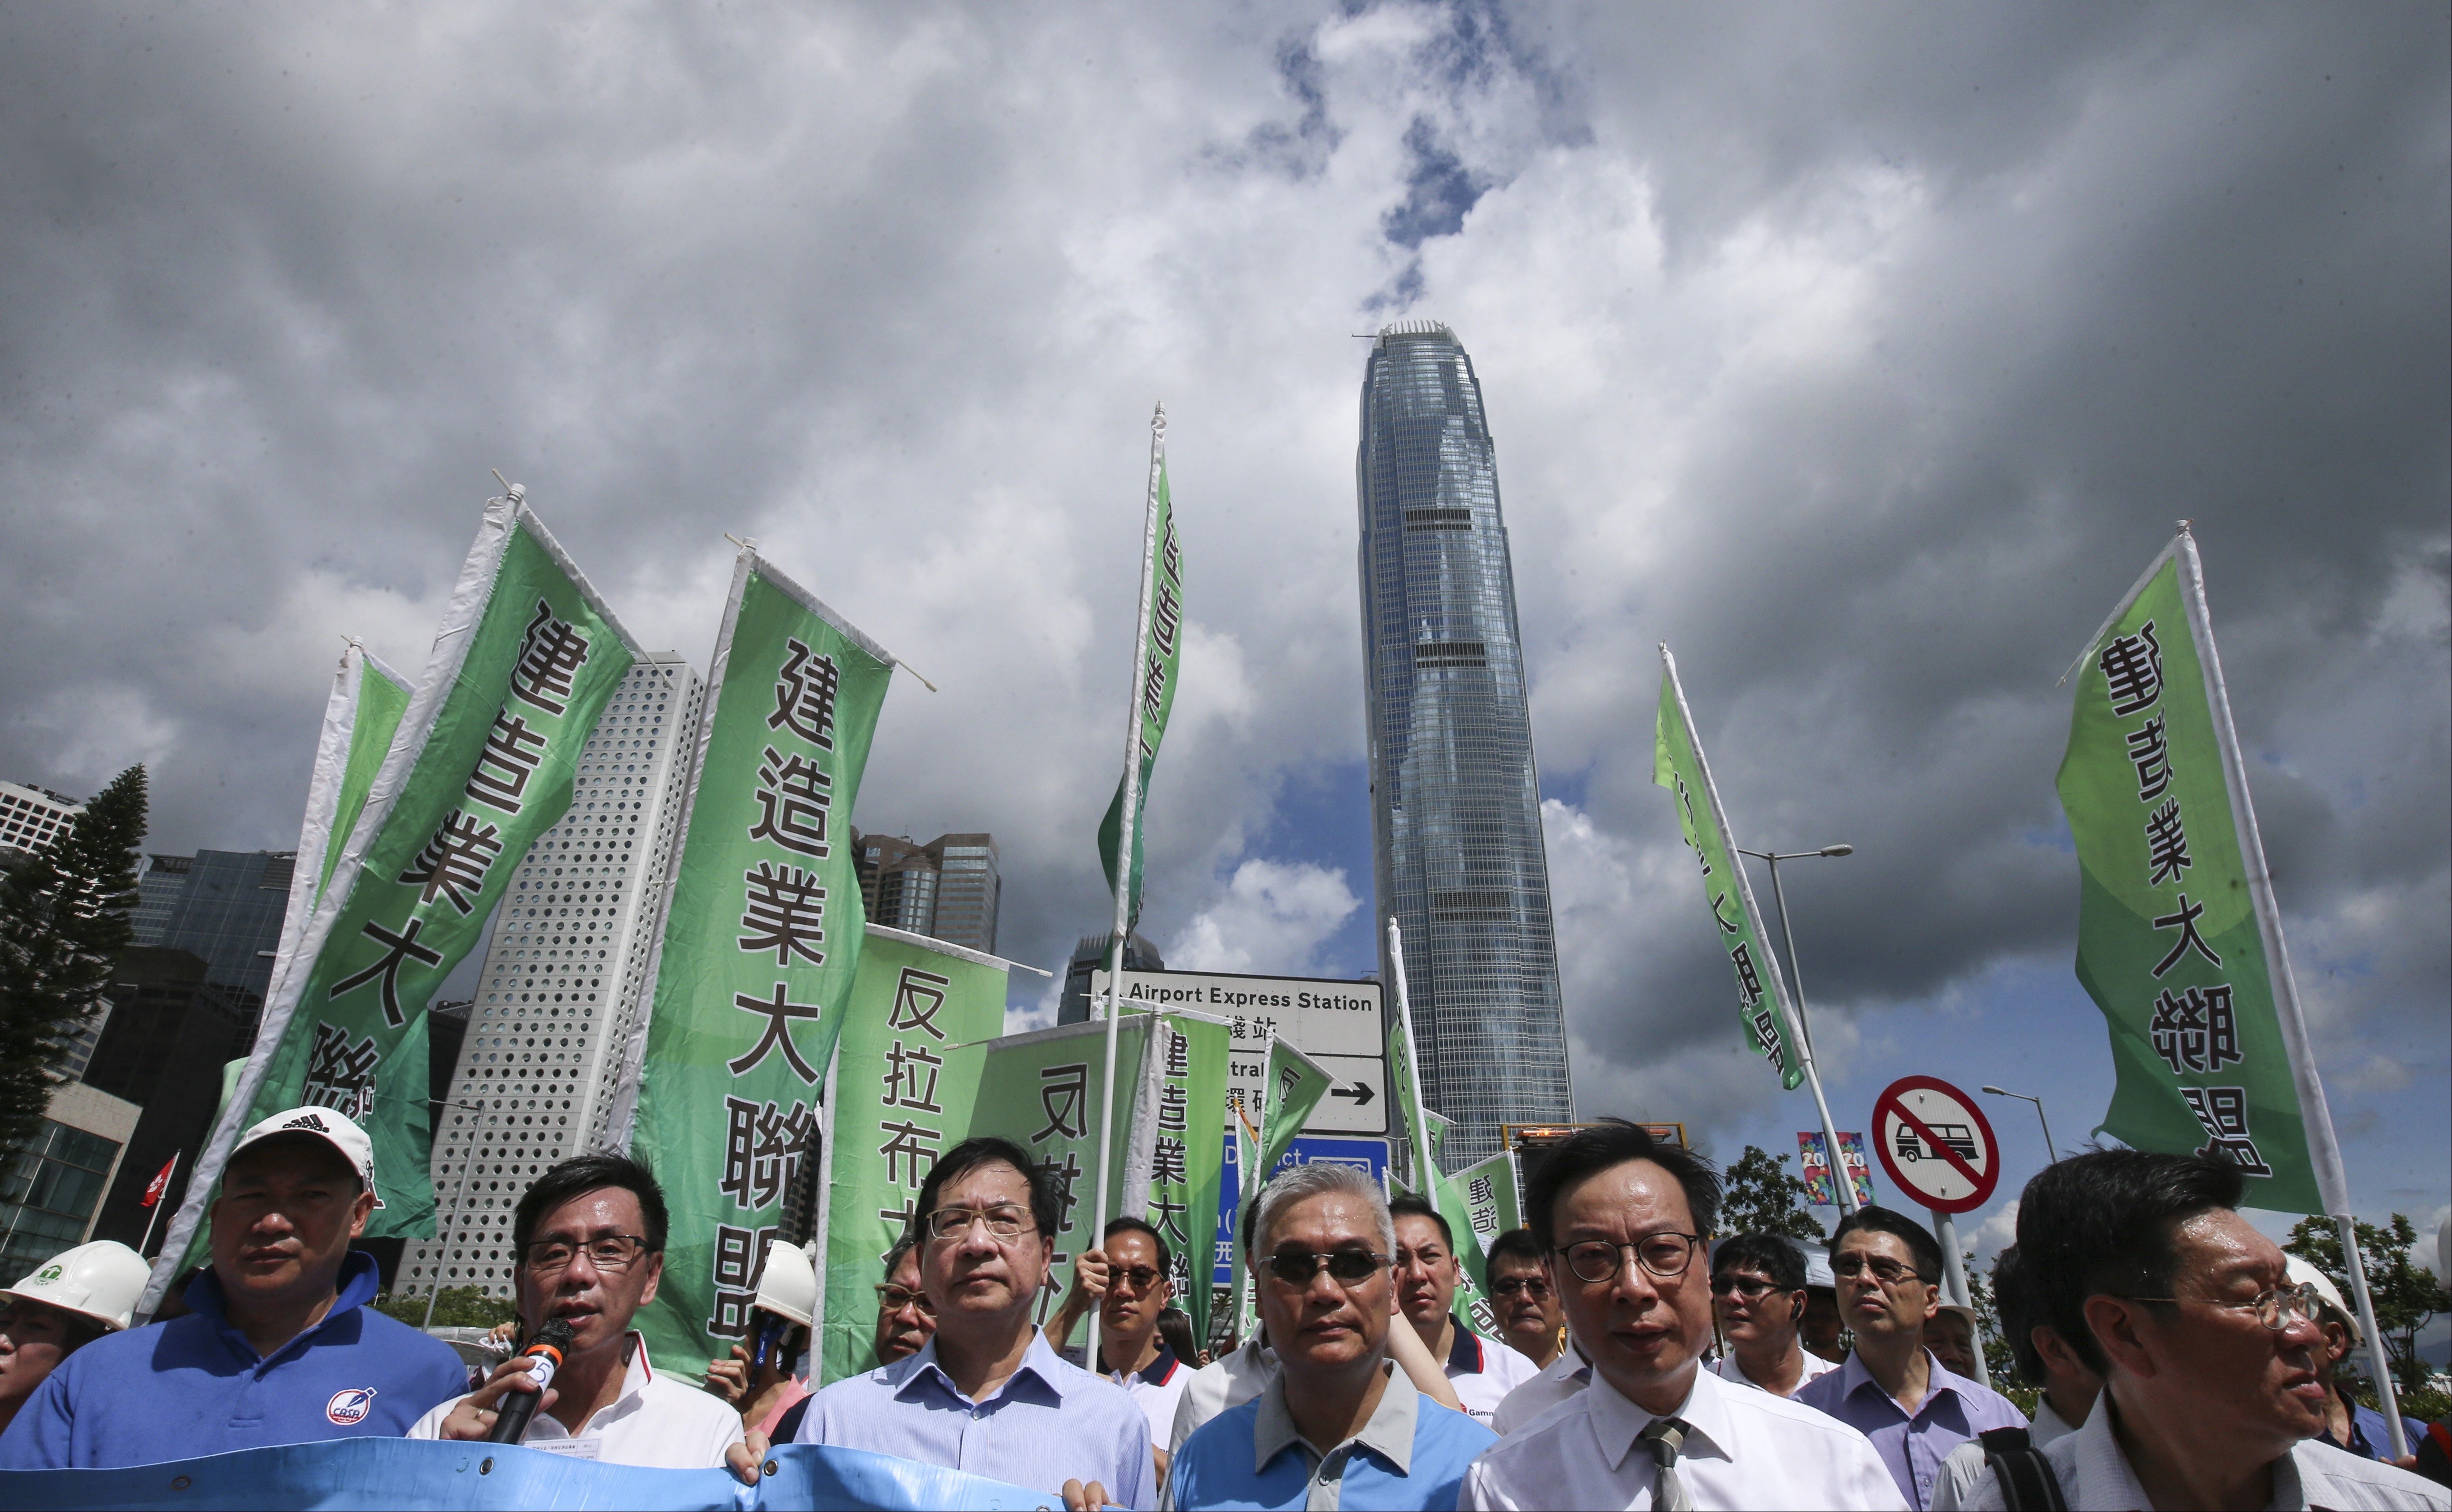 Groups representing the construction trade take part in a protest rally in June this year against filibustering in Legco’s Finance Committee. Because of the filibustering, the Finance Committee approved only about half of the HK$130 billion needed for the construction projects approved in the 2016/17 legislative year. Photo: David Wong